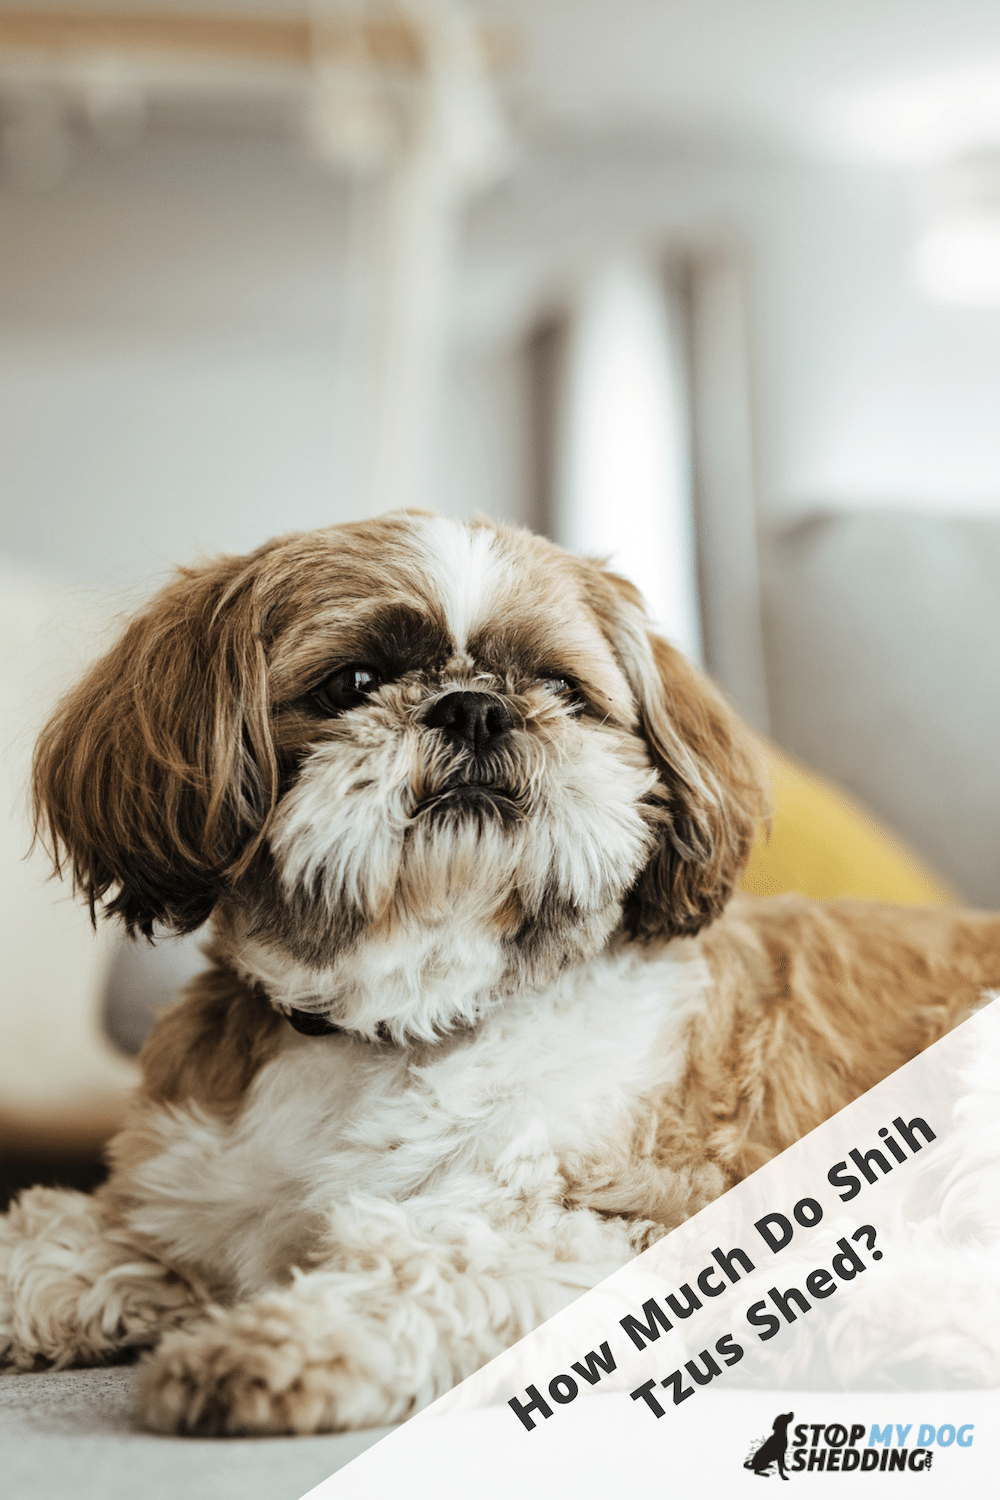 How Much Do Shih Tzus Shed?